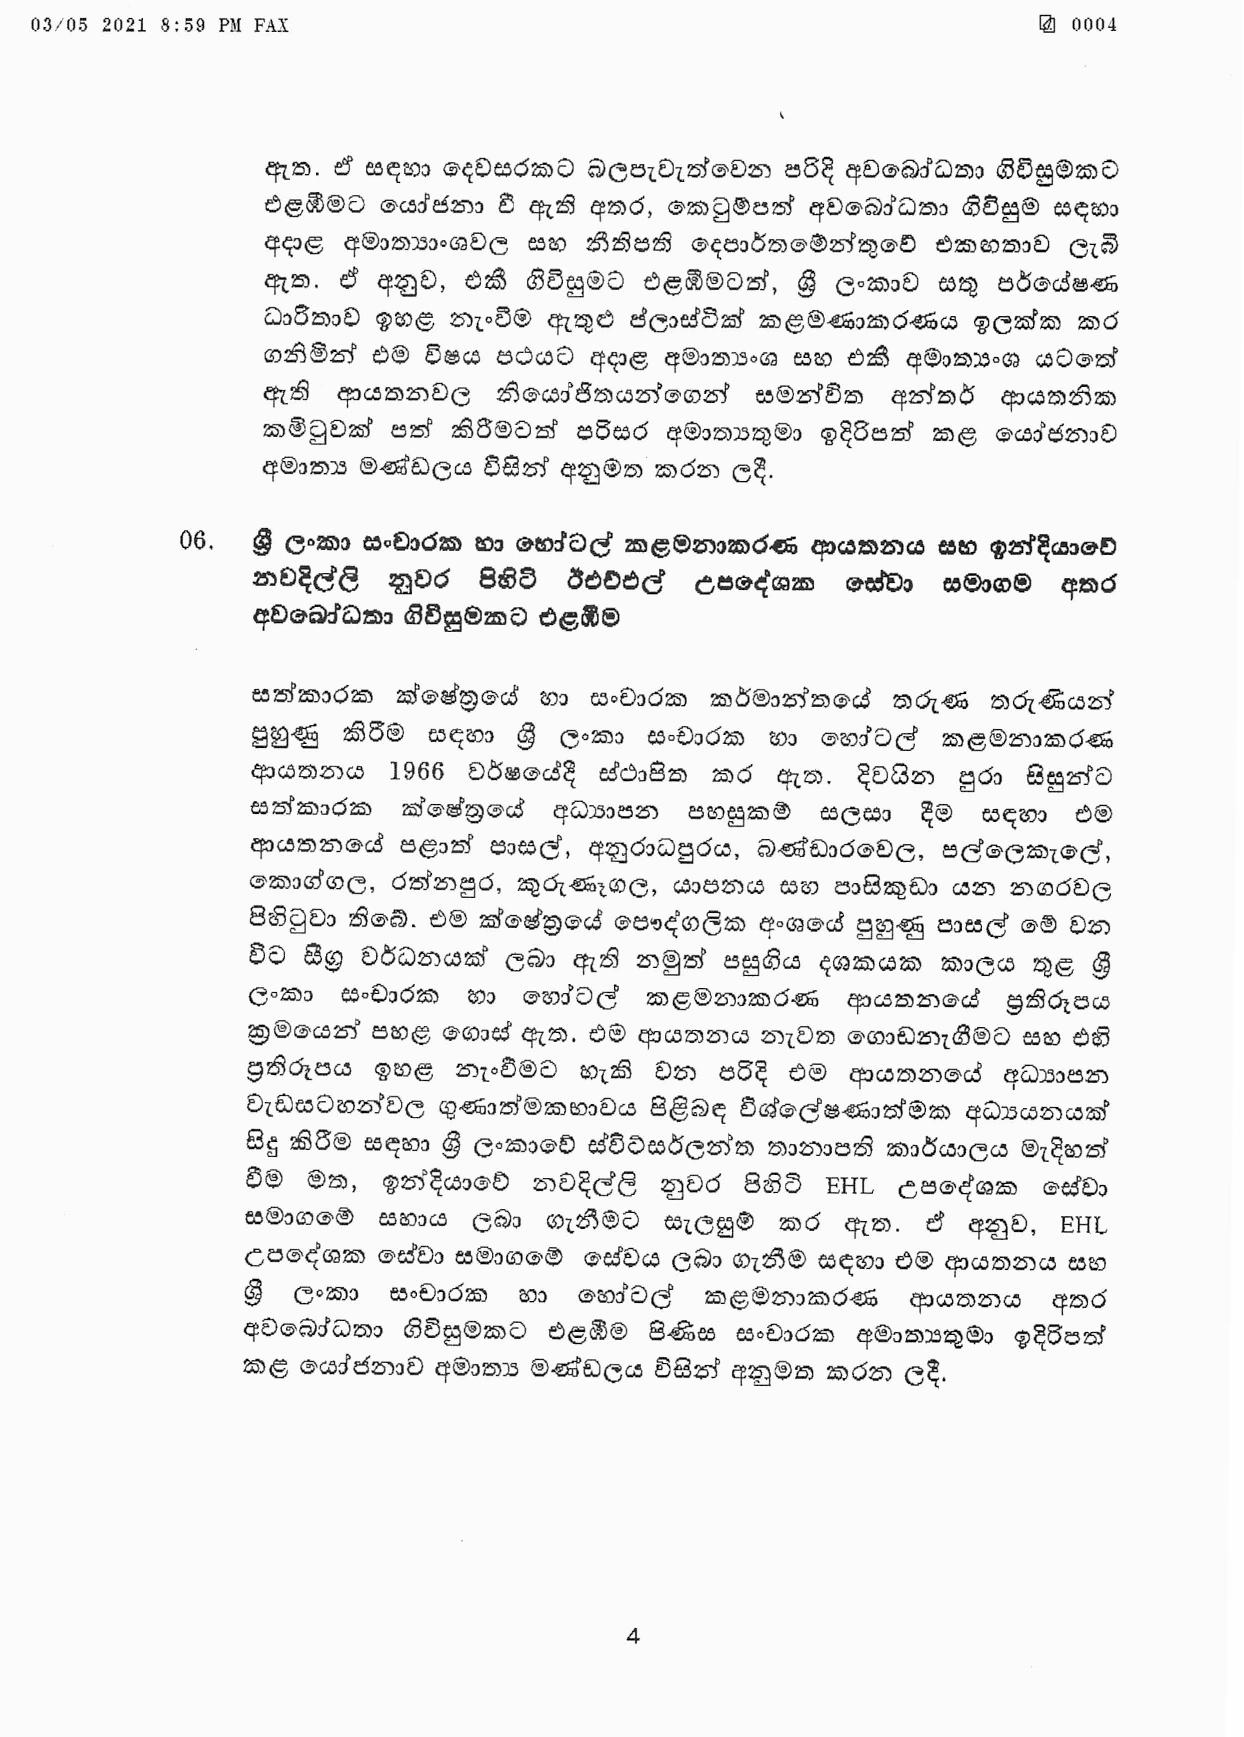 Cabinet Decision on 03.05.2021 page 001